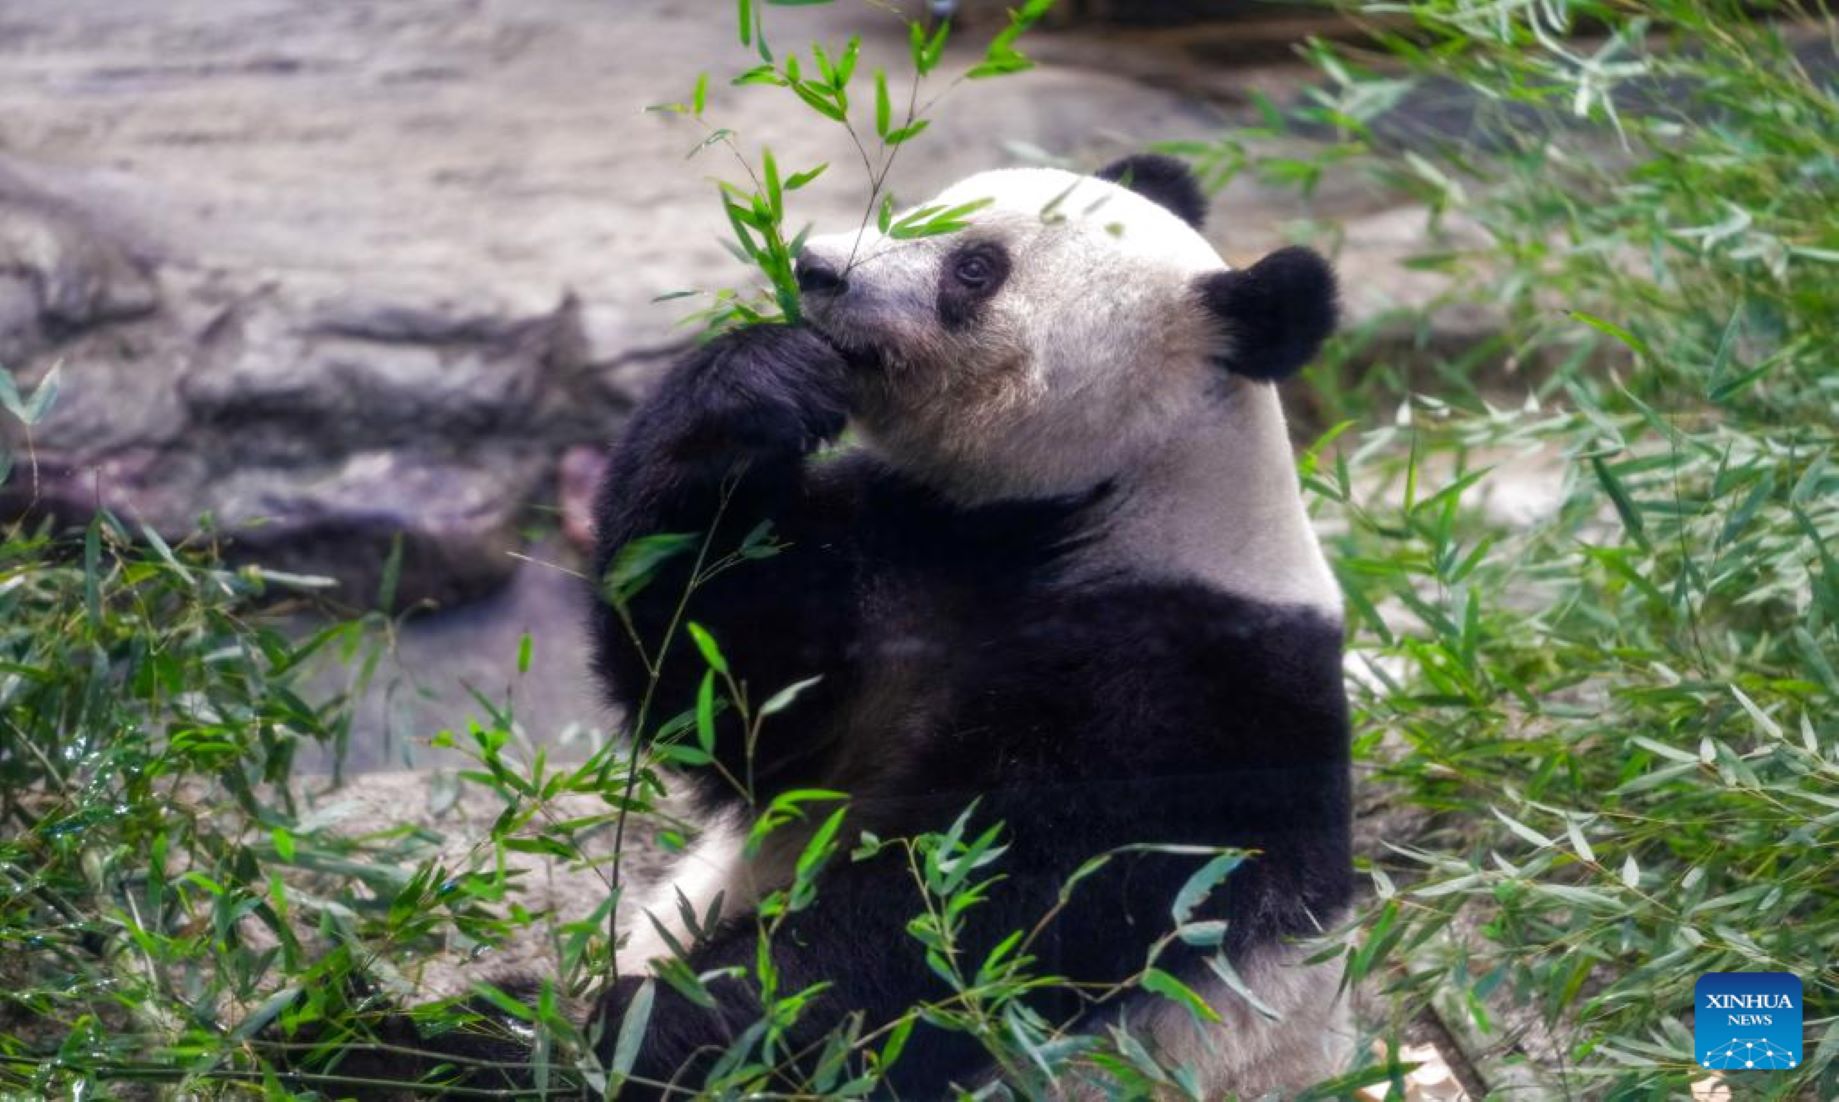 People In Tokyo Flocked To Say Goodbye To Beloved Giant Panda Xiang Xiang